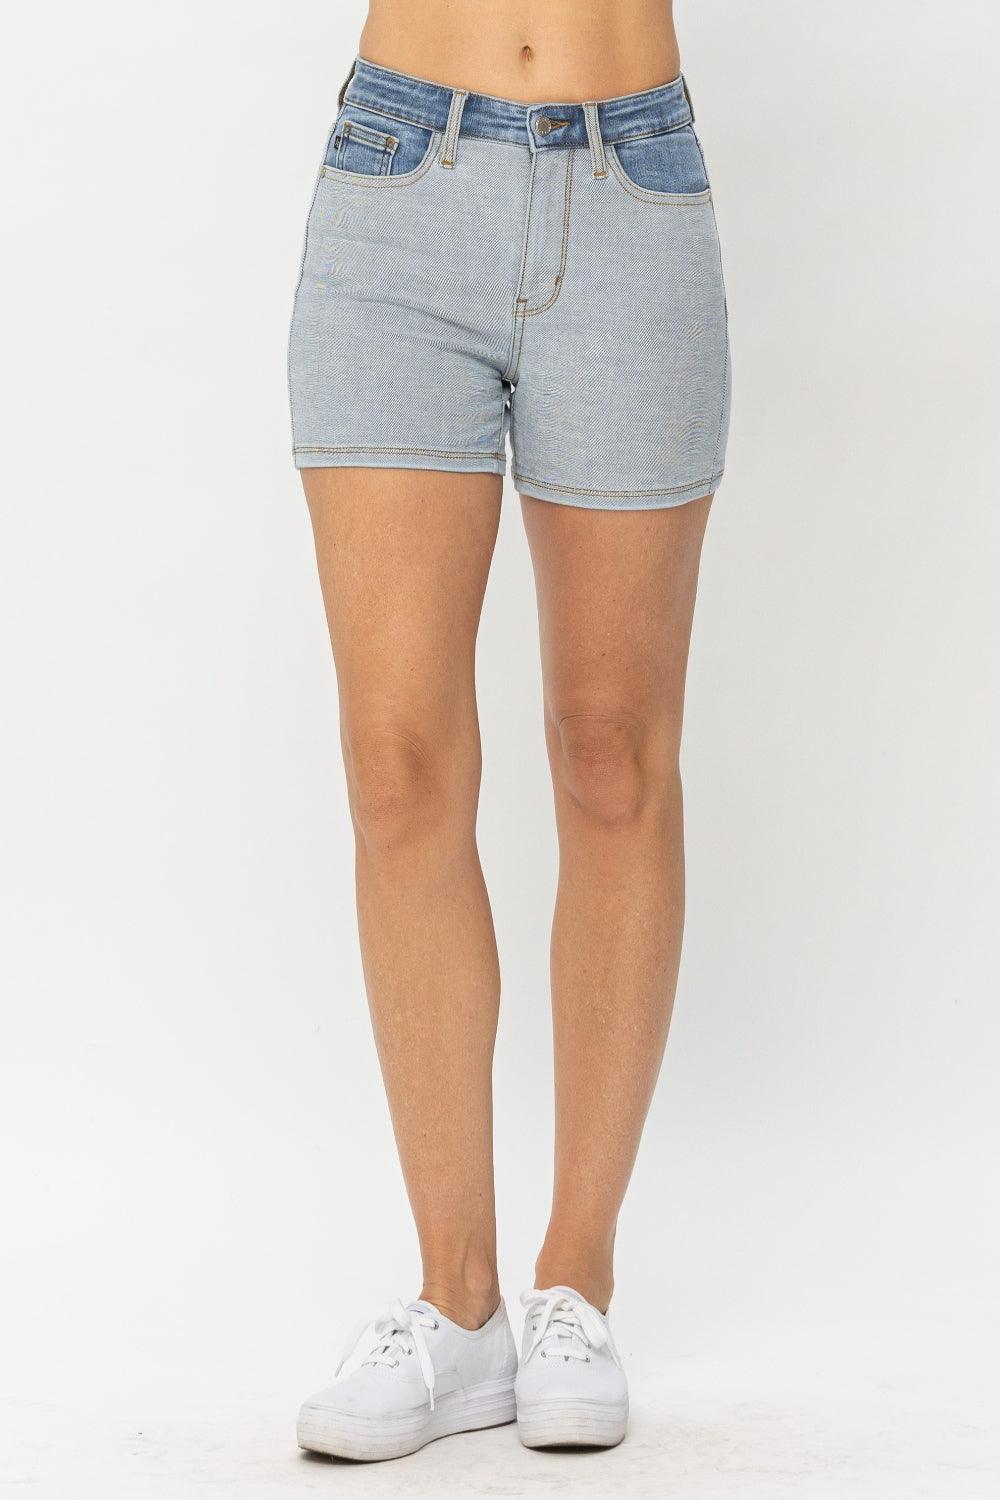 Judy Blue Full Size Color Block Denim Shorts - God's Girl Gifts And Apparel